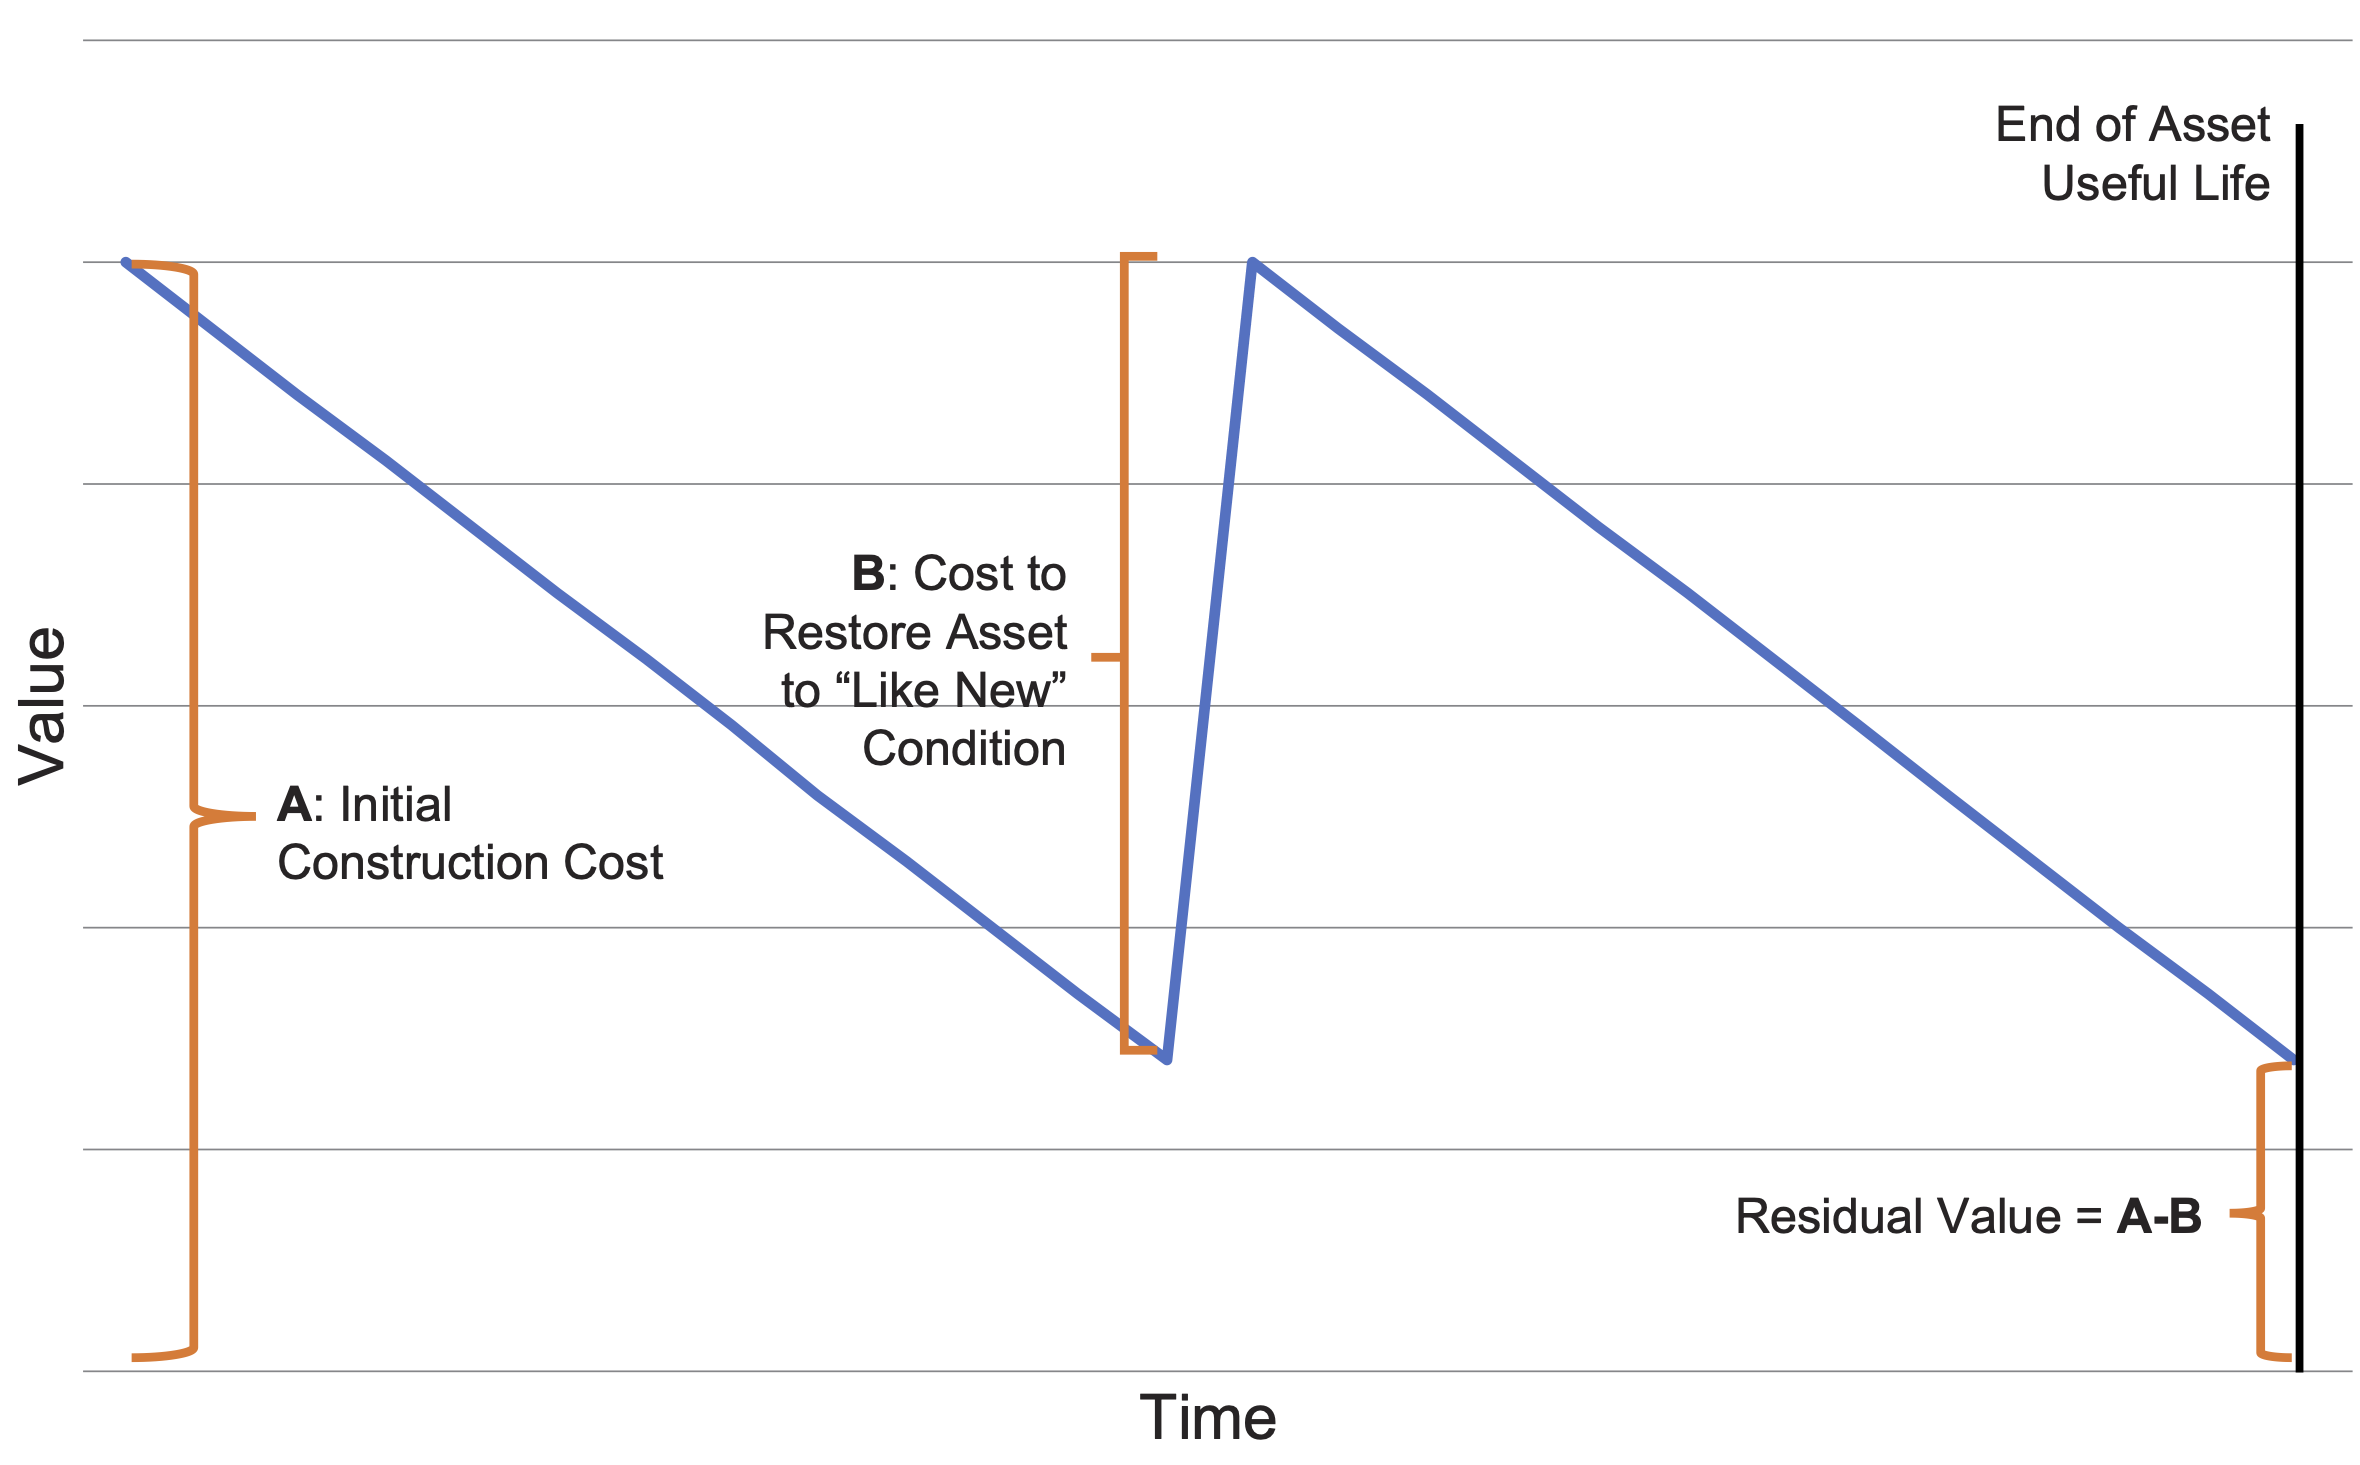 A line plot where the x-axis is time and the y-axis is value. A single line with a consistent downward slope displays a decrease in value from point A (construction) to point B (restoration). At restoration, the value increases back to the original value, then decreases again until the end of asset useful life.